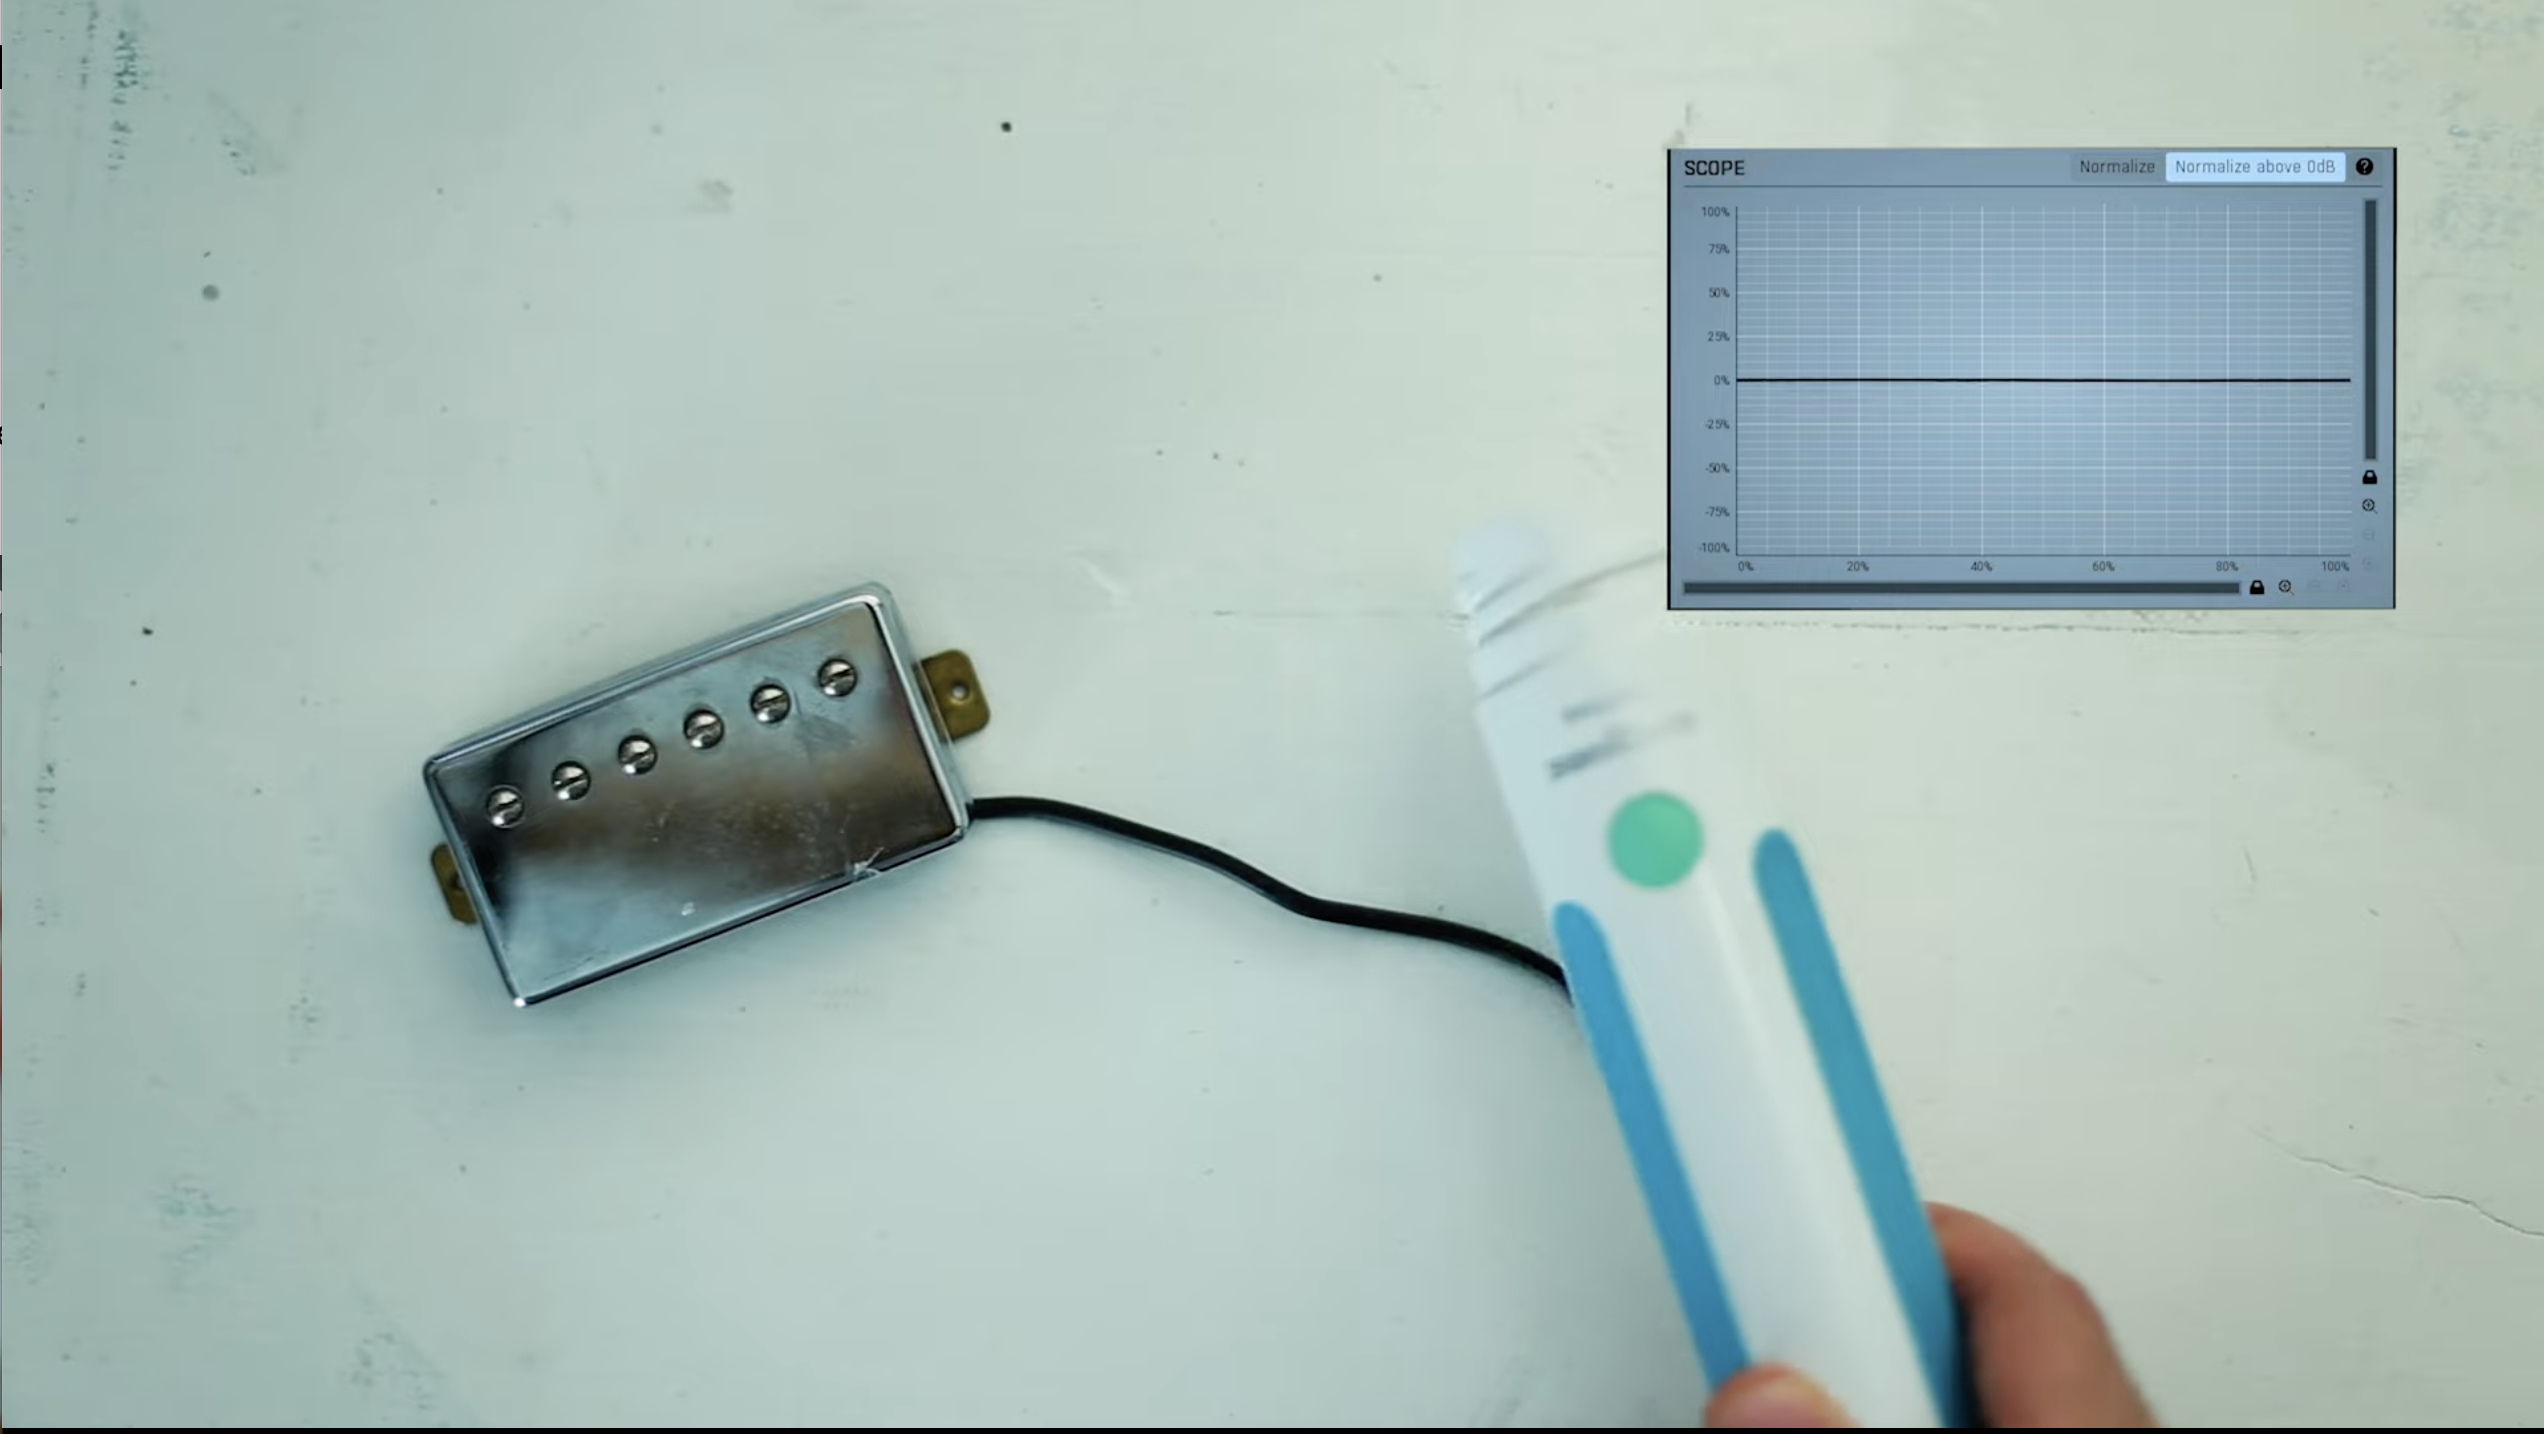 Toothbrush-is-a-Synthesizer